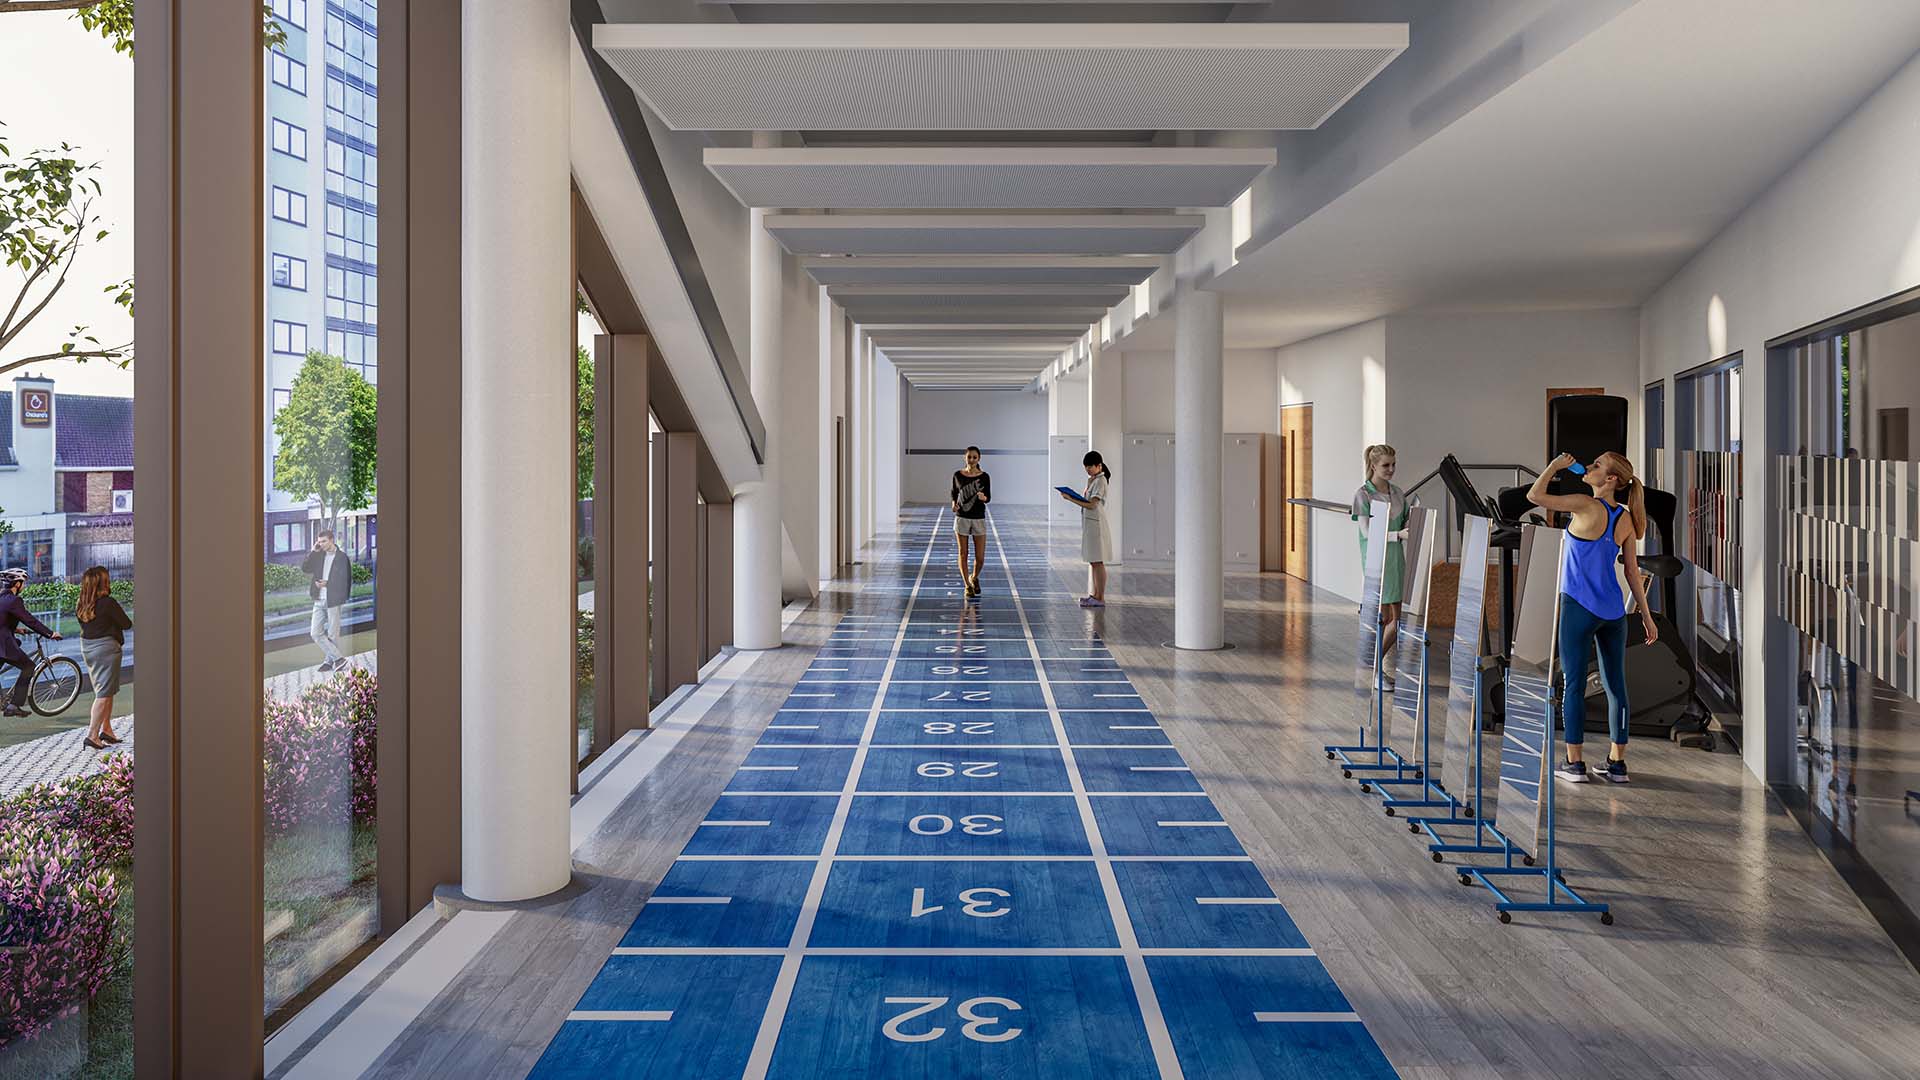 A person has their gait analysed on a test track by some windows